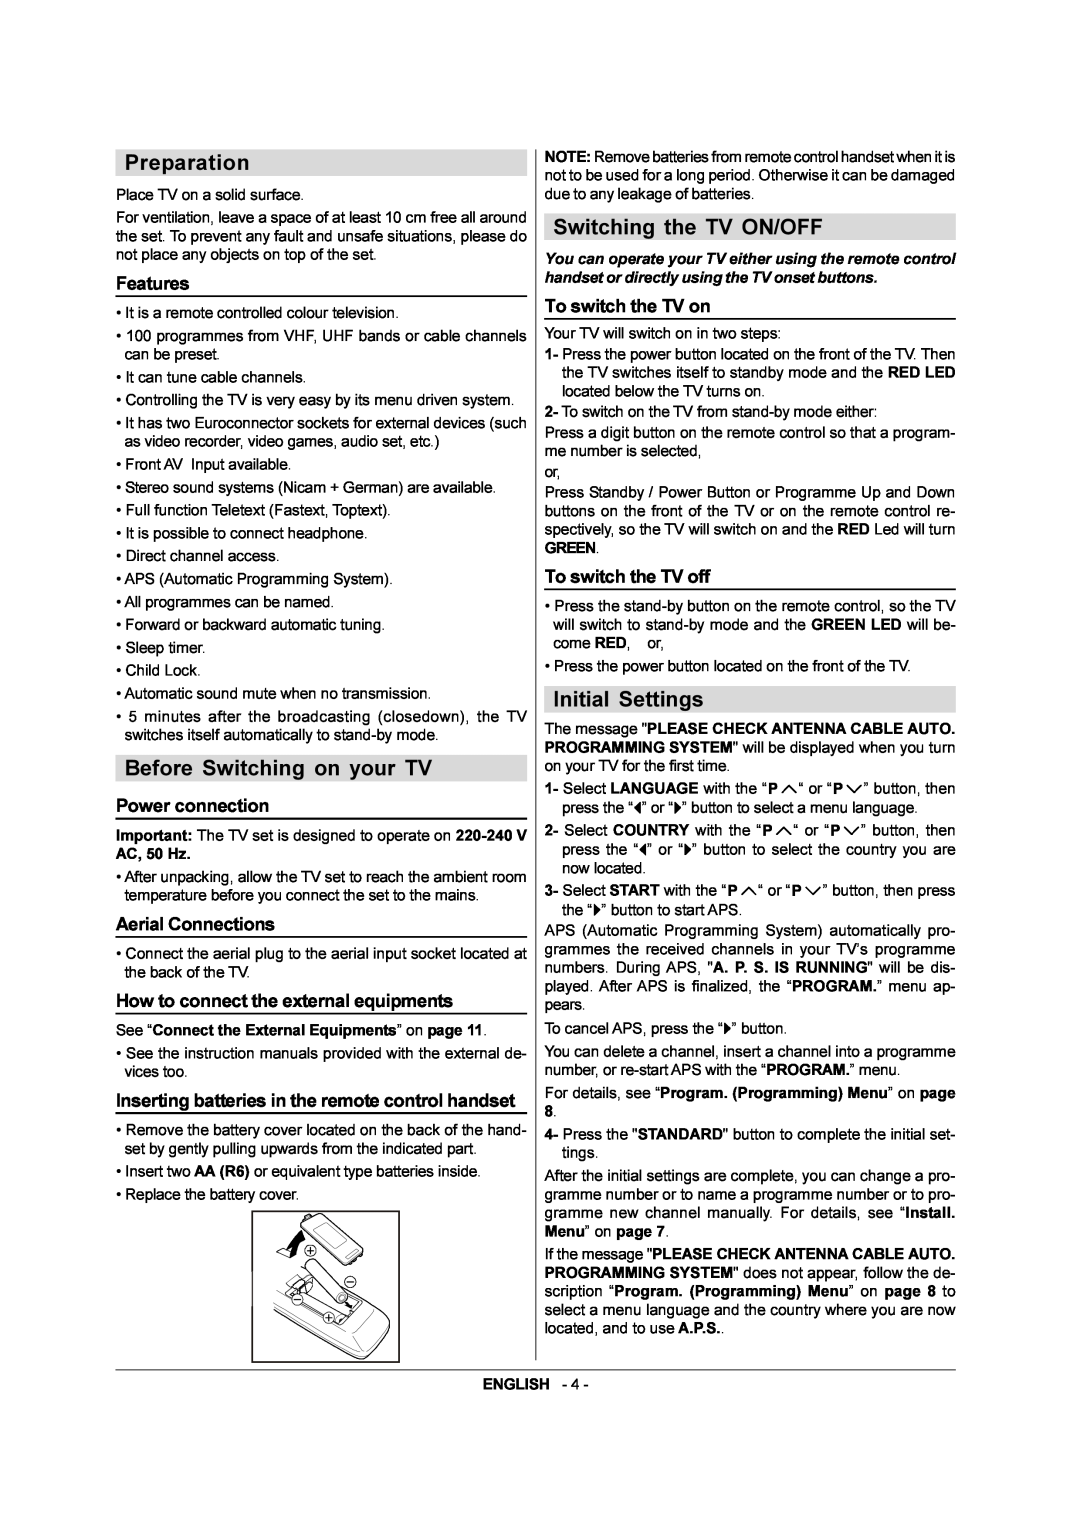 JVC AV-21QS5SE manual Preparation, Before Switching on your TV, Switching the TV ON/OFF, Initial Settings, Features 